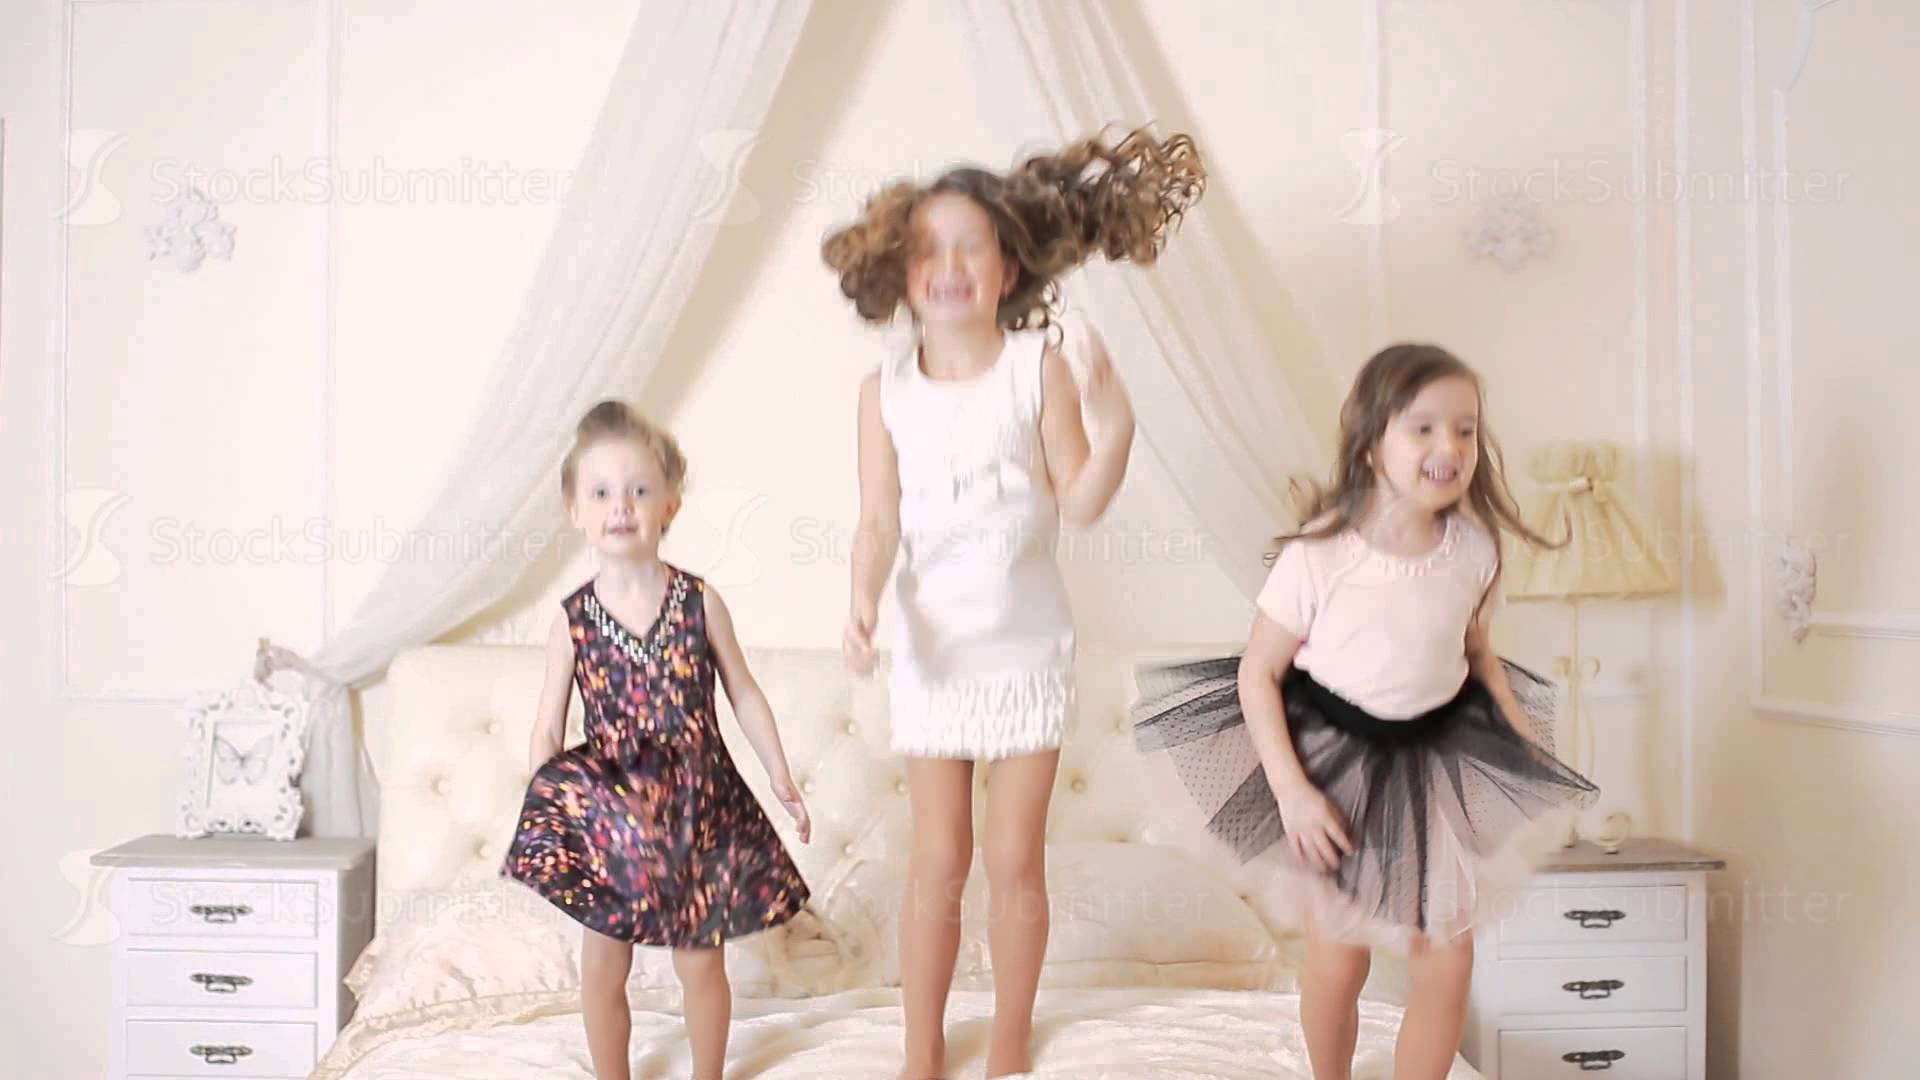 little girls jumping on the bed - YouTube